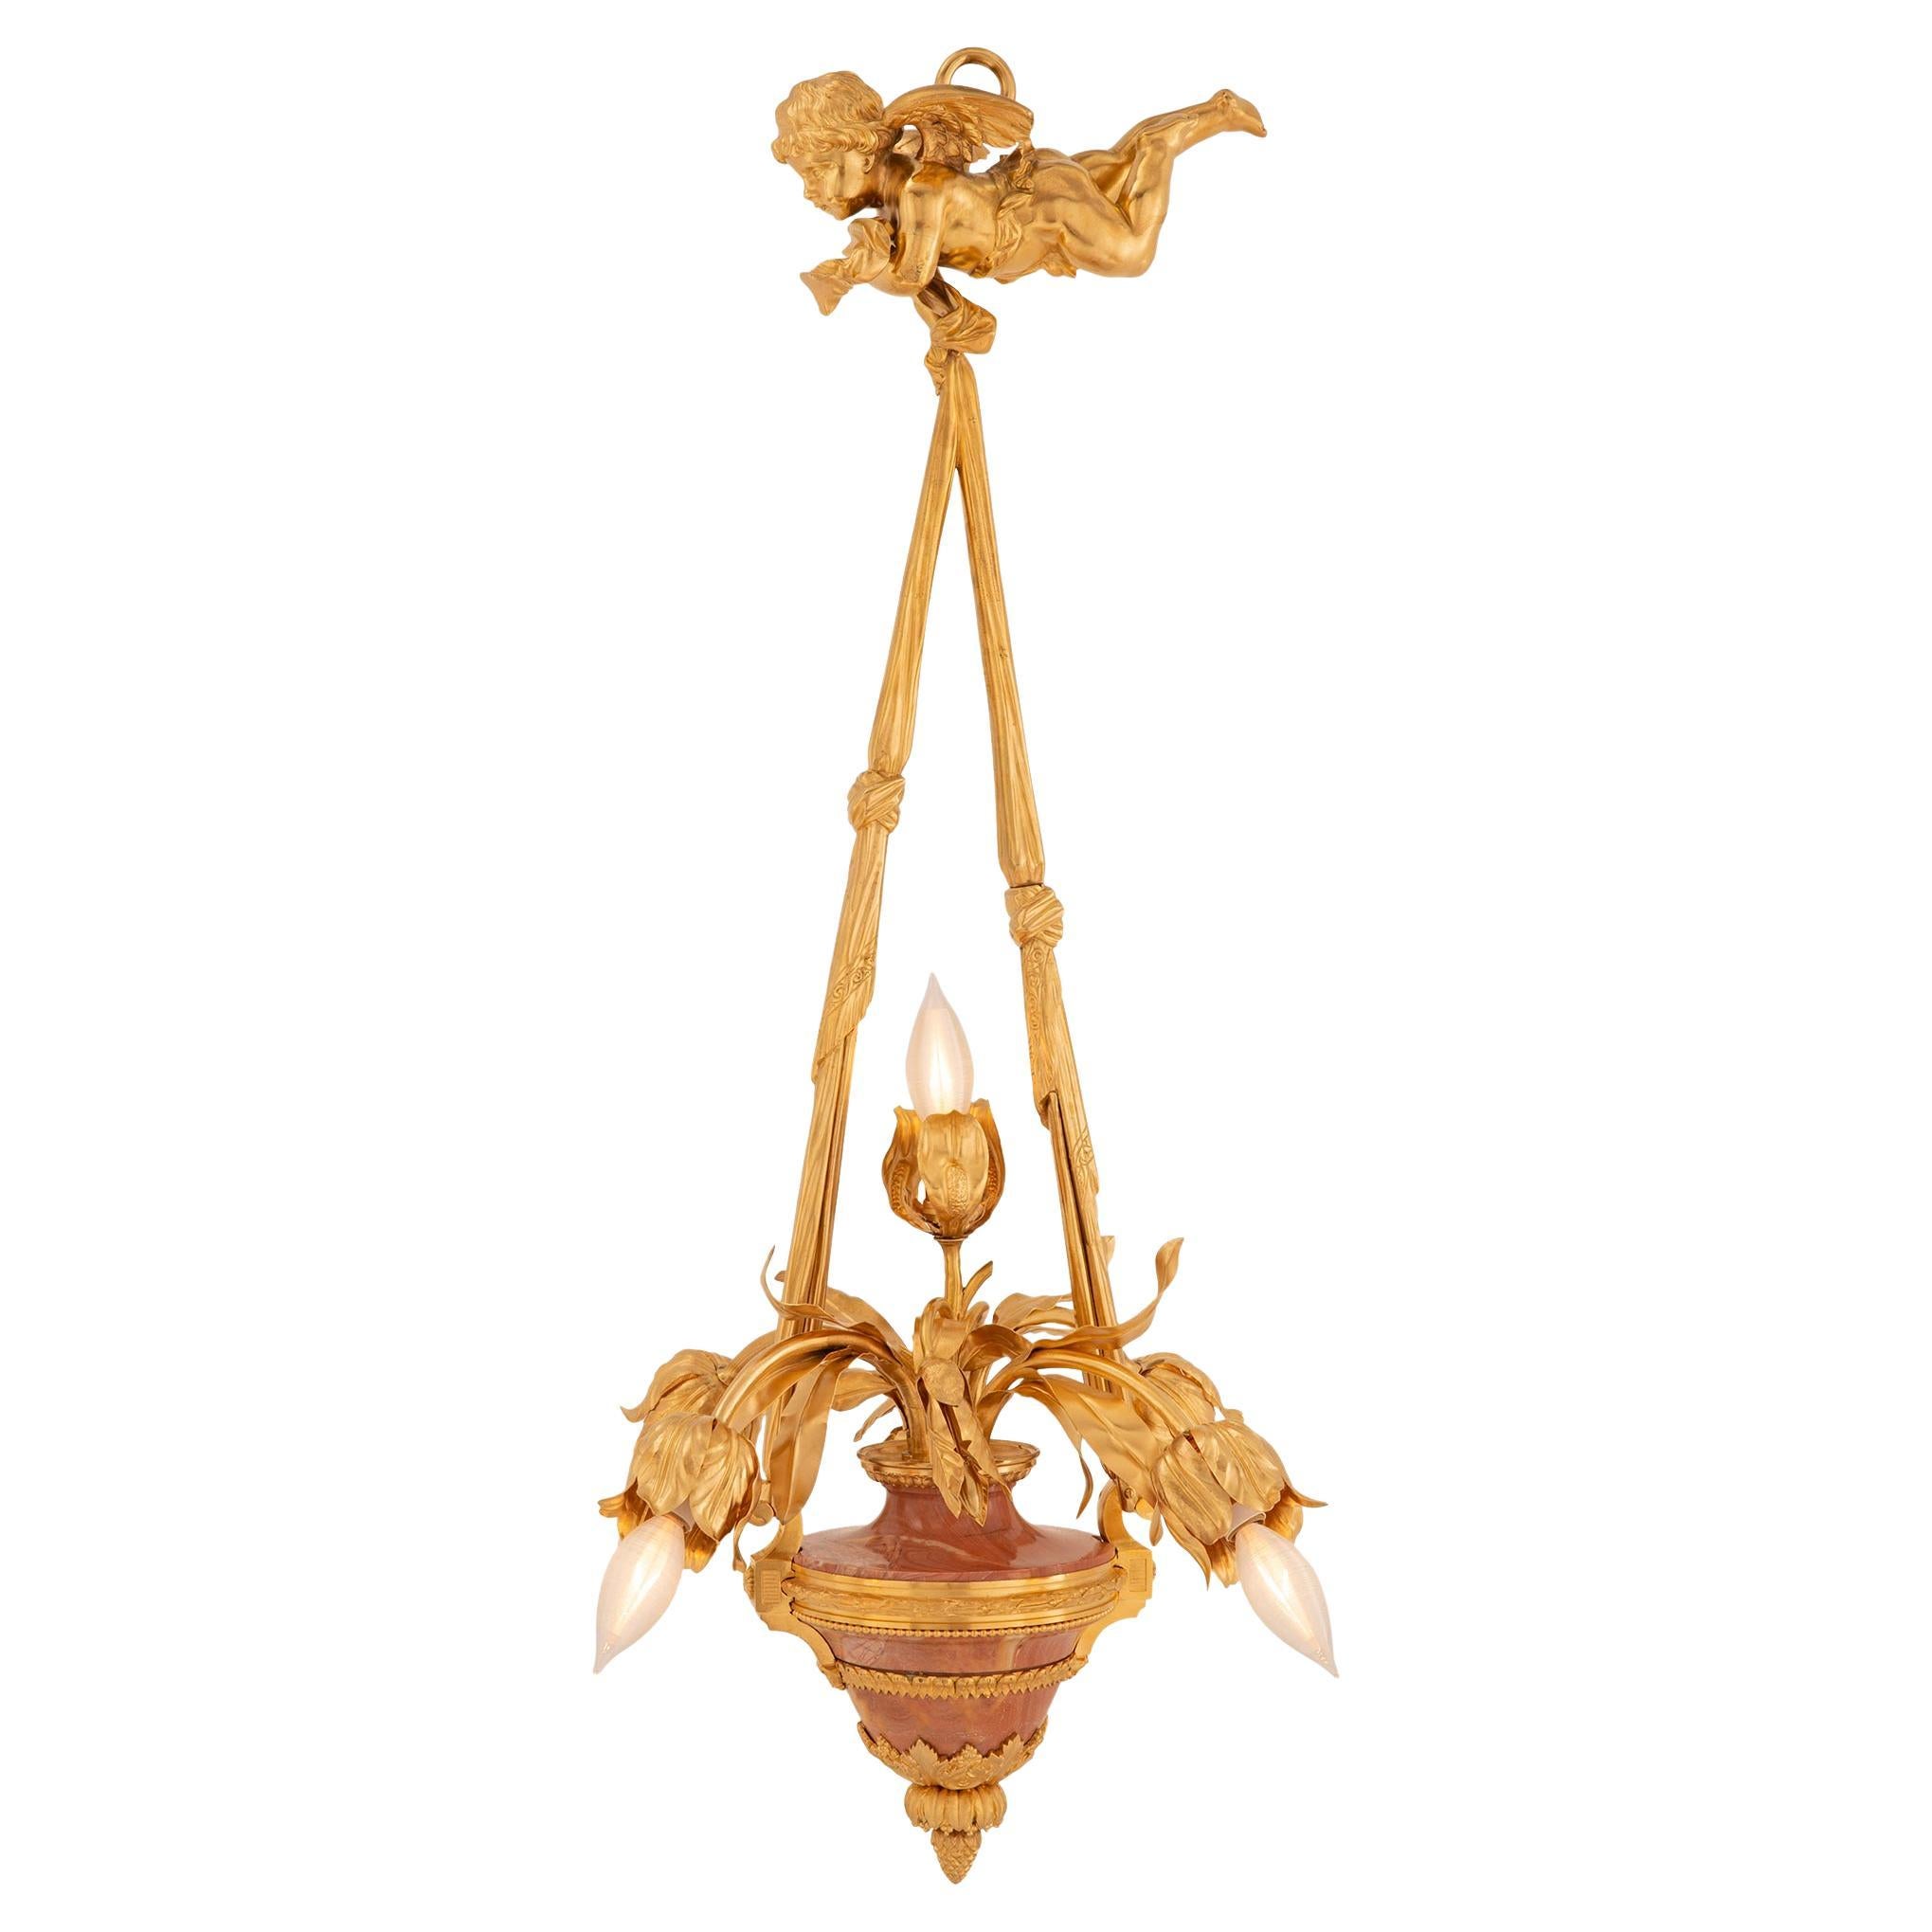 French 19th Century Louis XVI Belle Époque Period Ormolu And Marble Chandelier For Sale